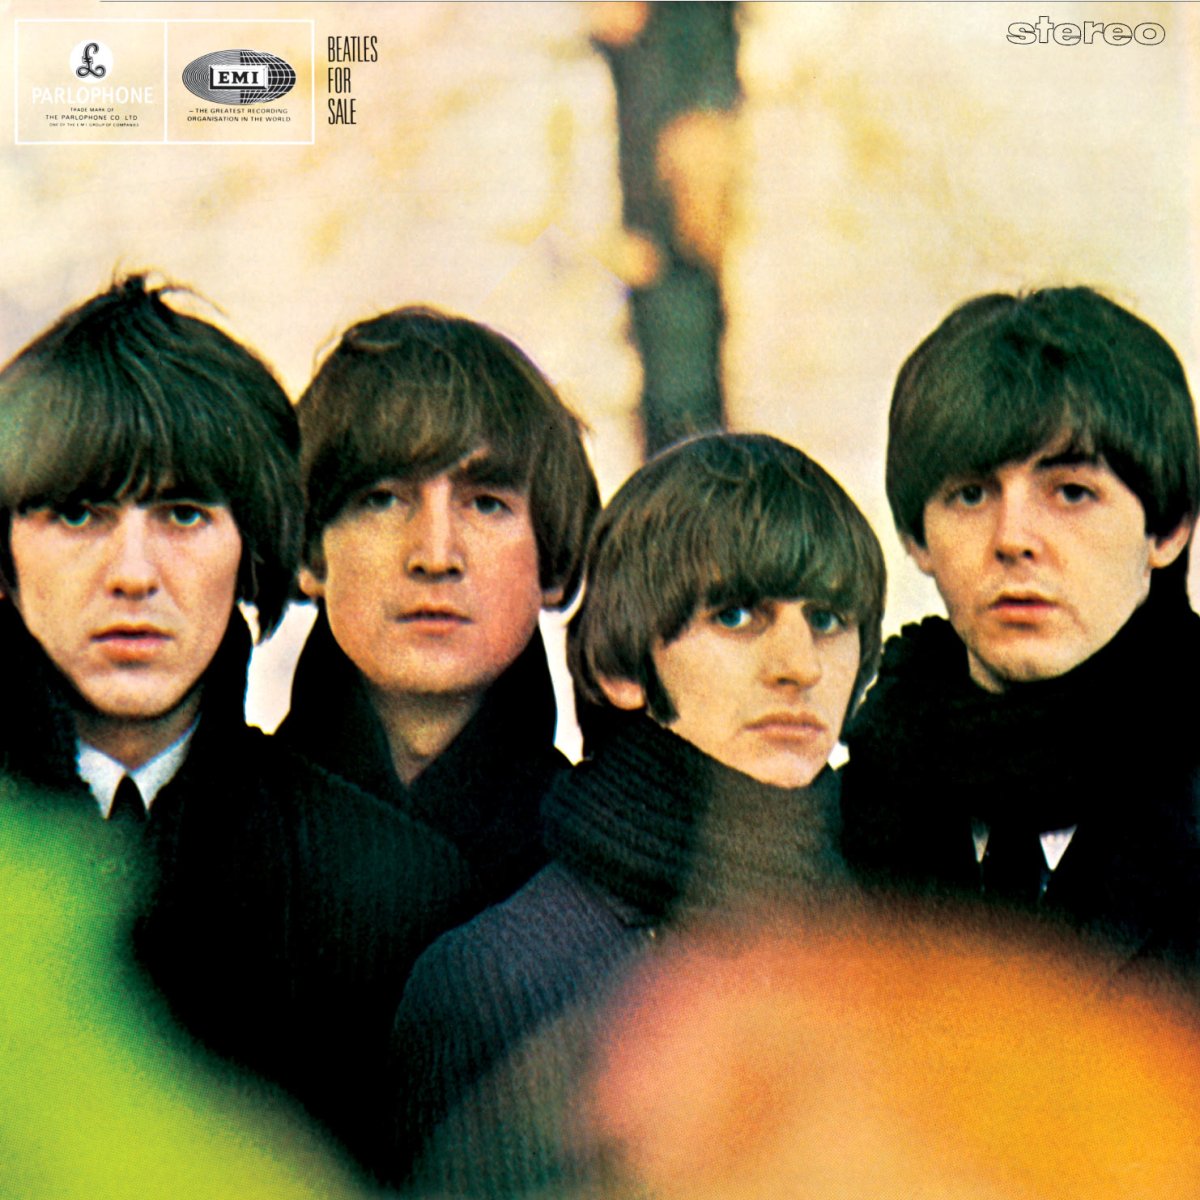 The Beatles – Beatles for Sale